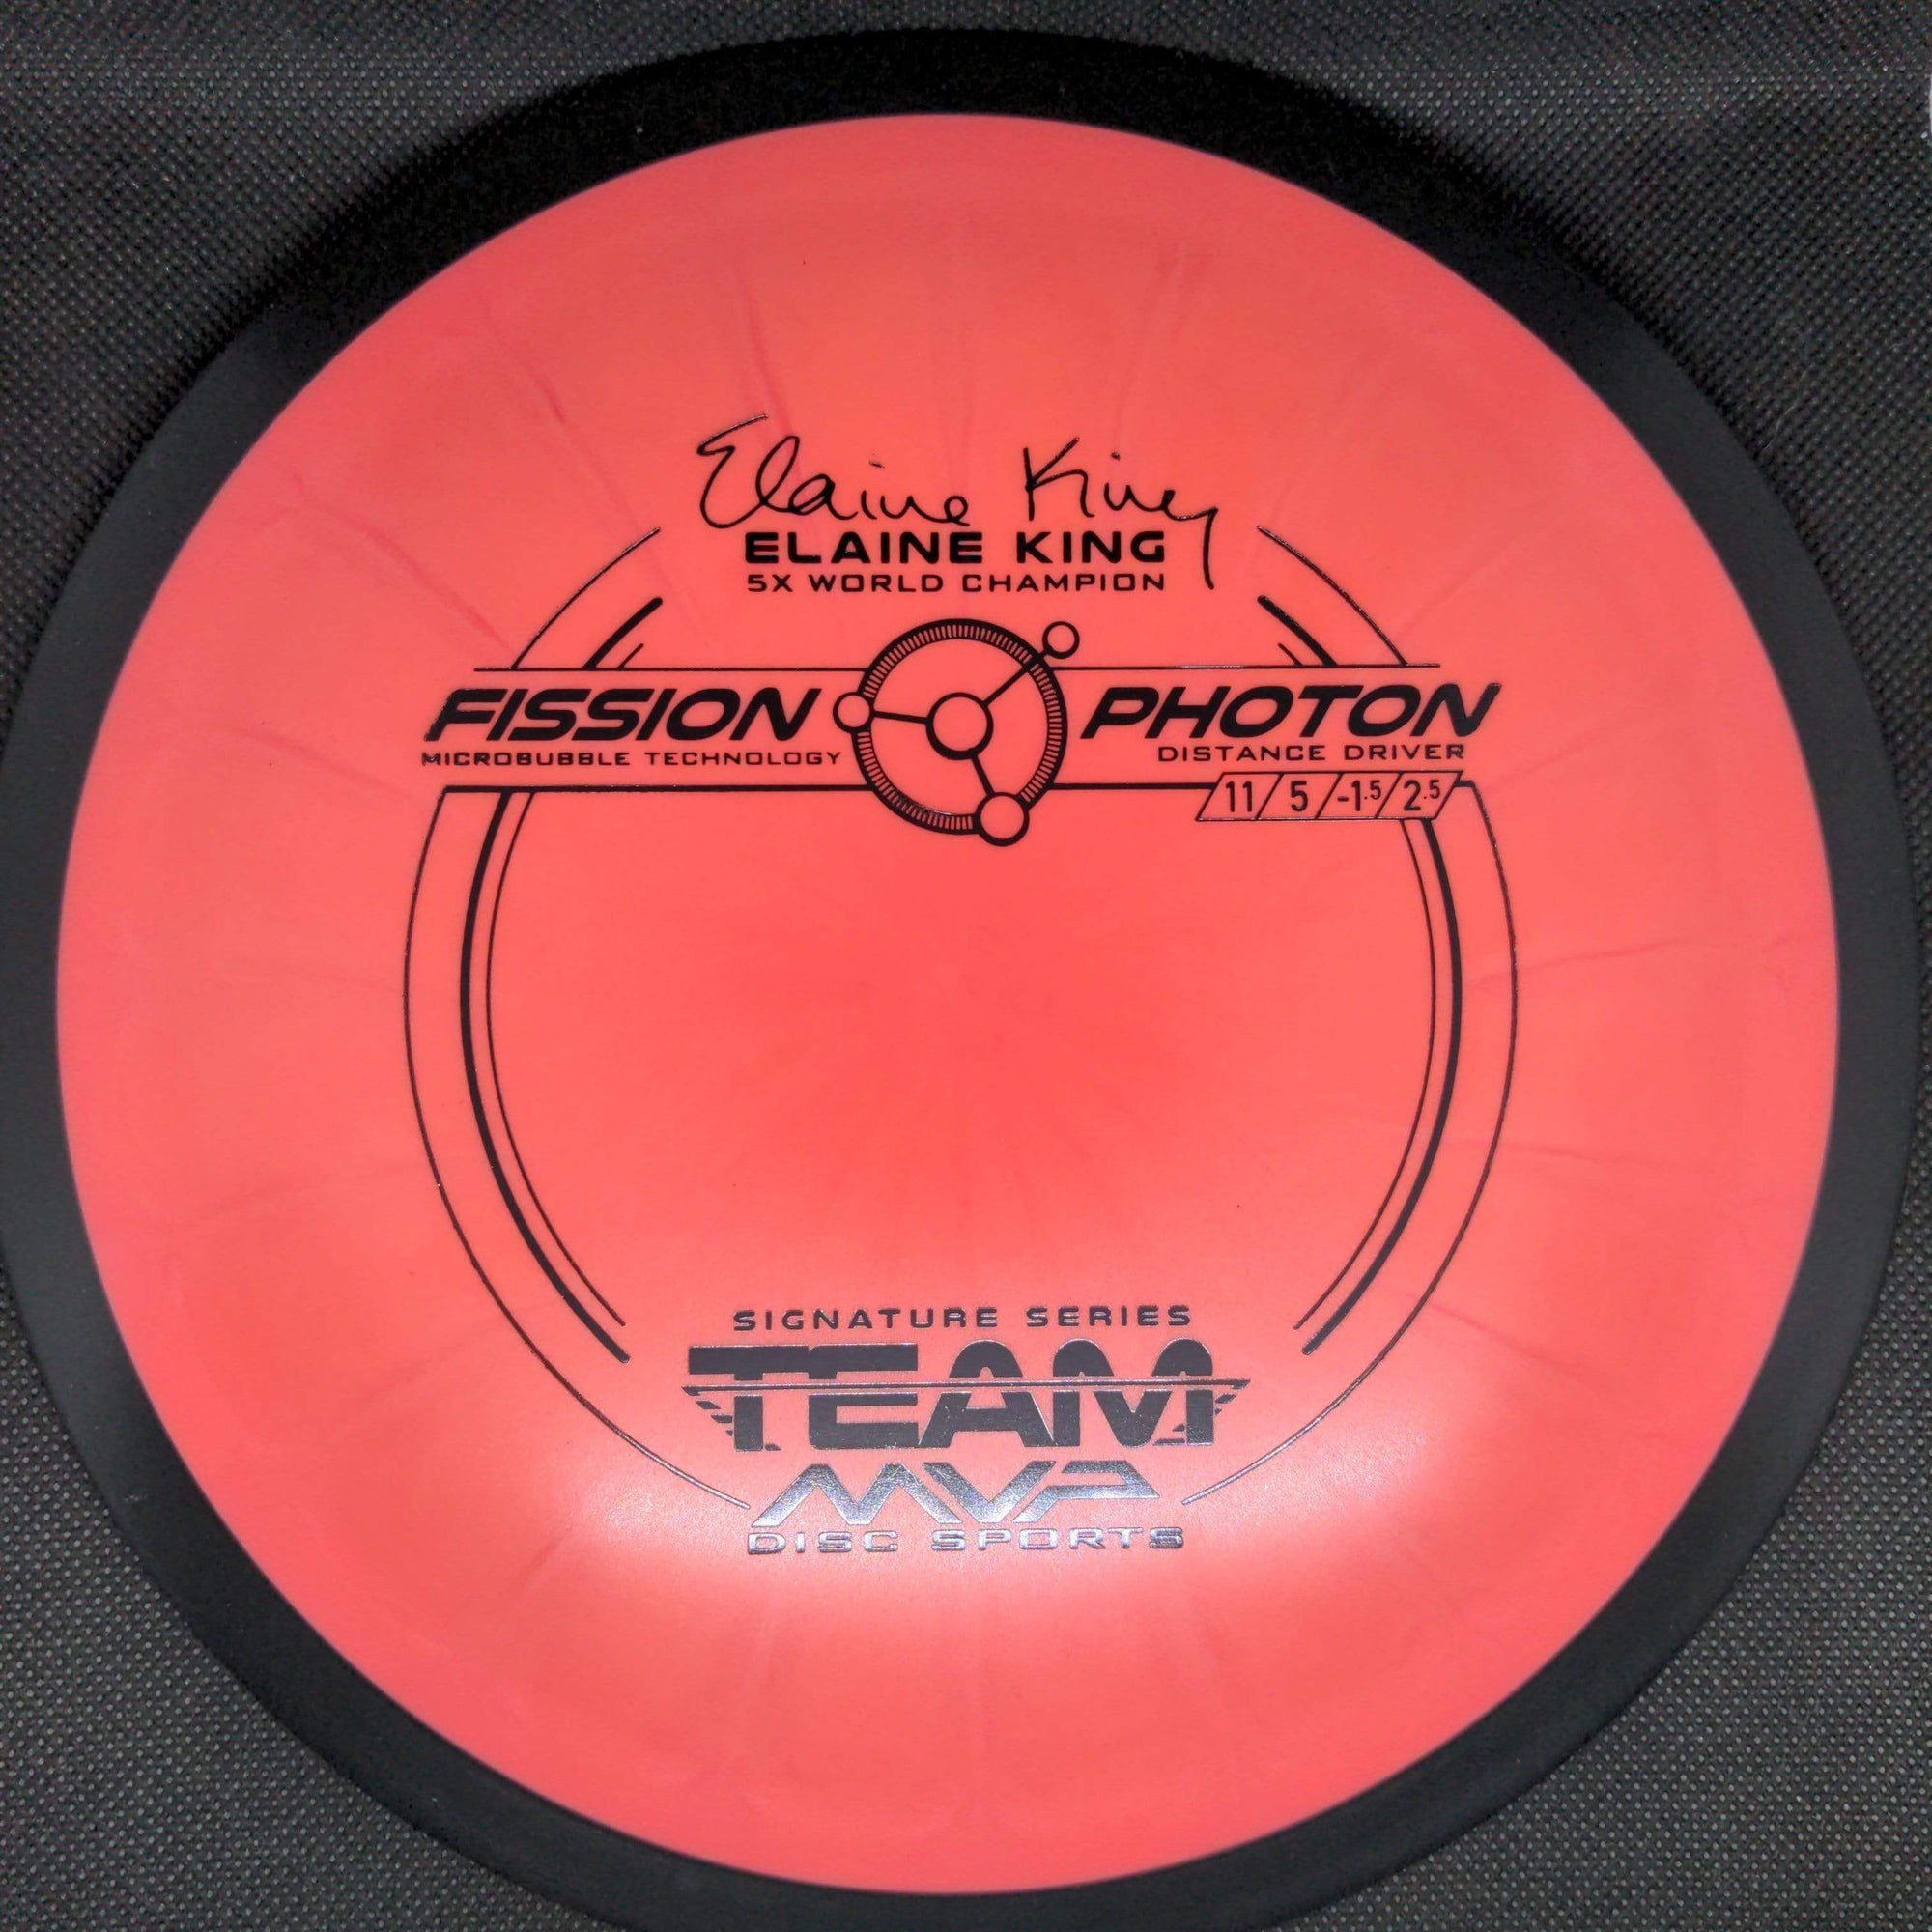 MVP Distance Driver Red 174g Fission Photon - Elaine King 5x champion